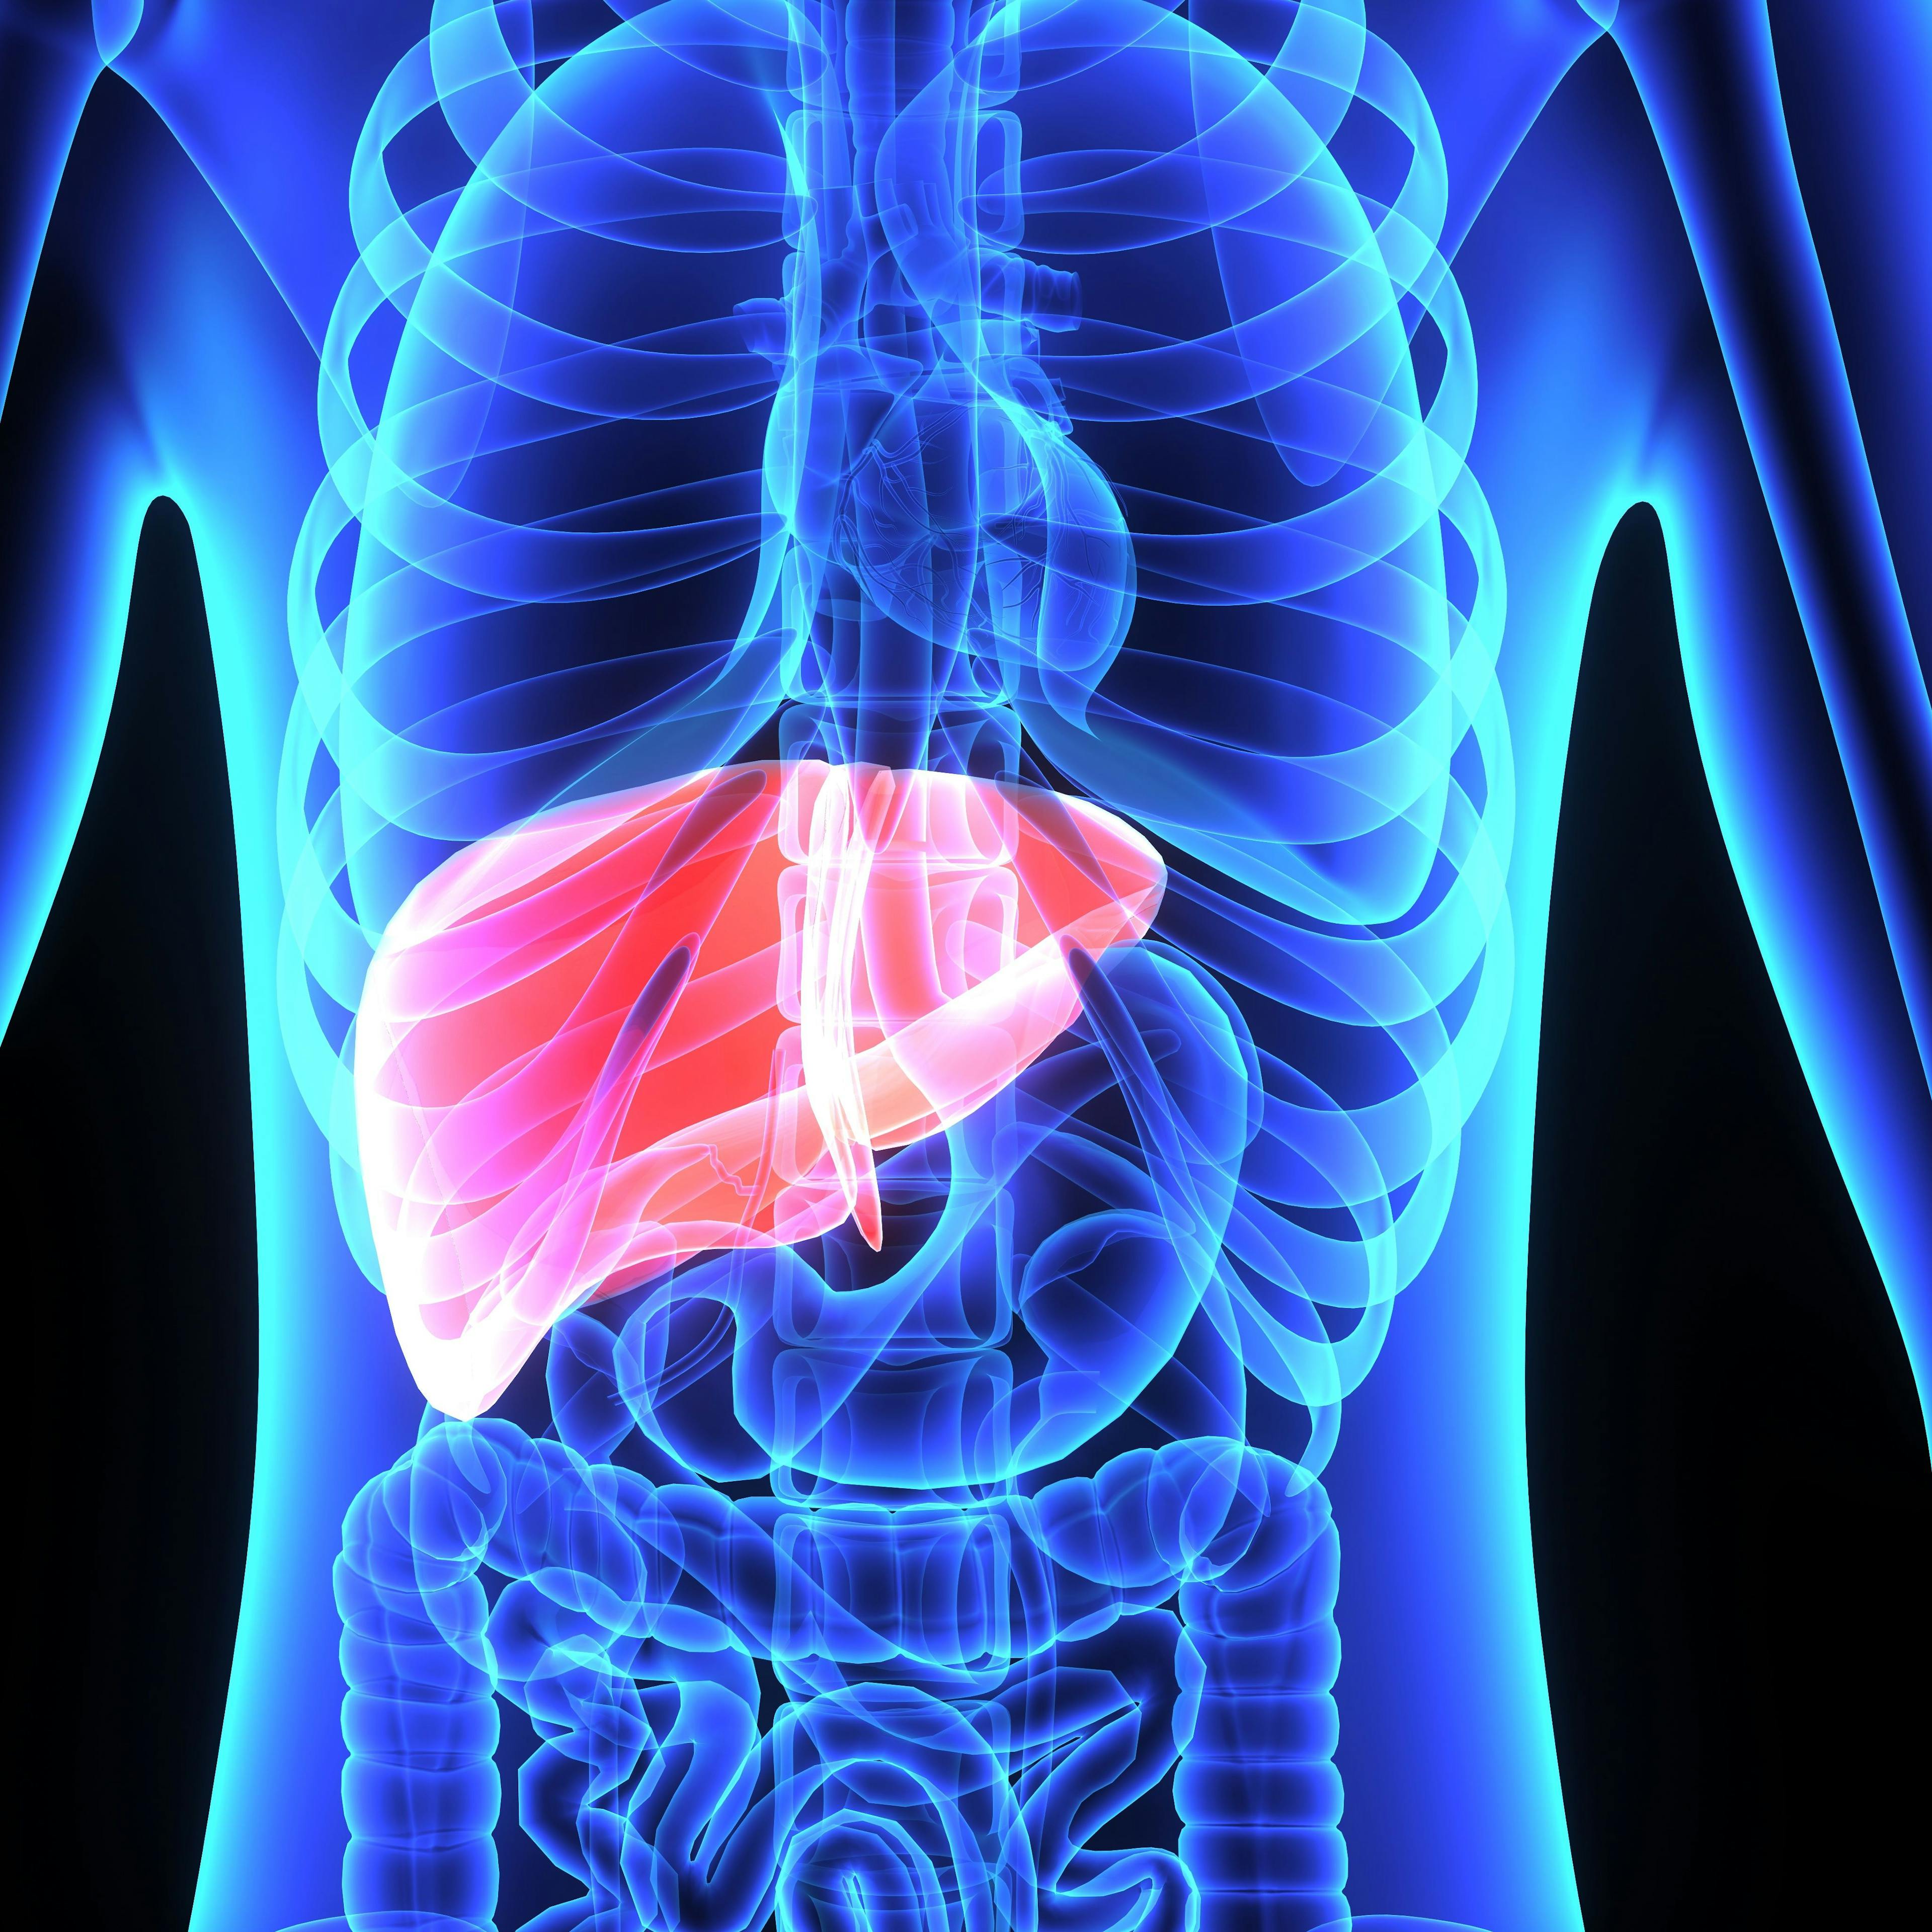 Duration of response results with pembrolizumab plus lenvatinib in advanced hepatocellular carcinoma appear to be ‘promising’ in the phase 3 LEAP-002 trial.